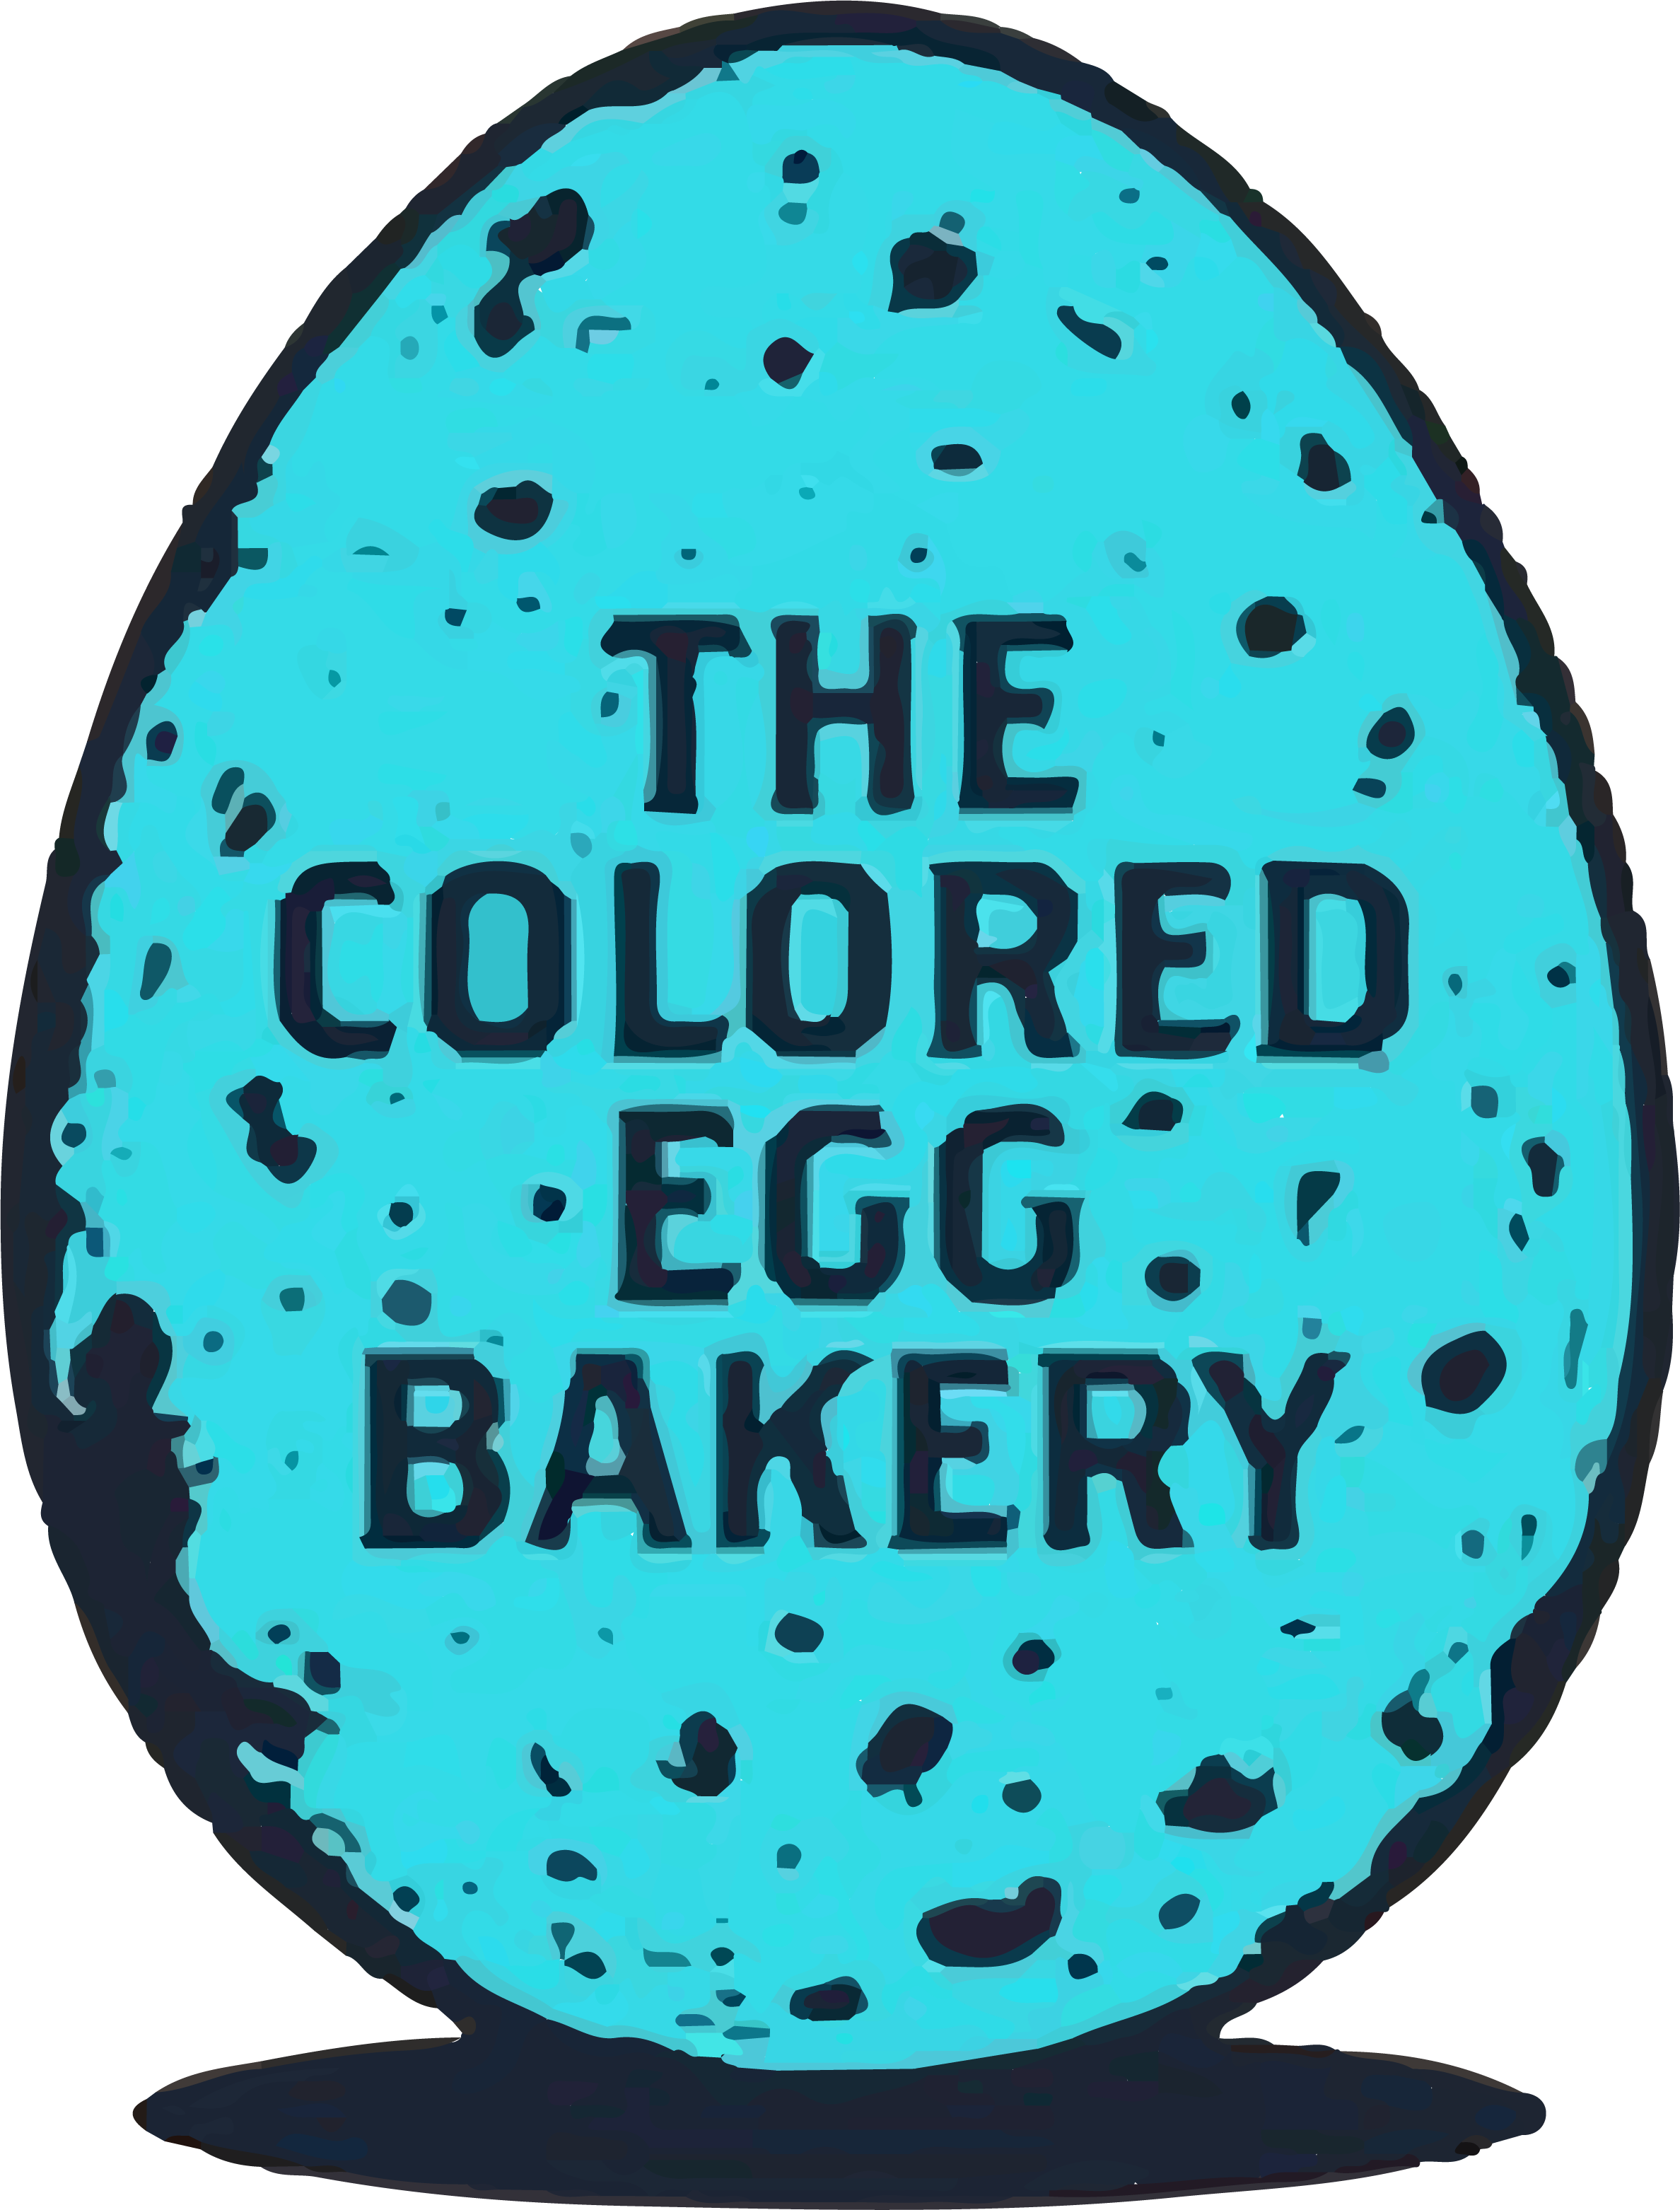 The Colored Egg logo